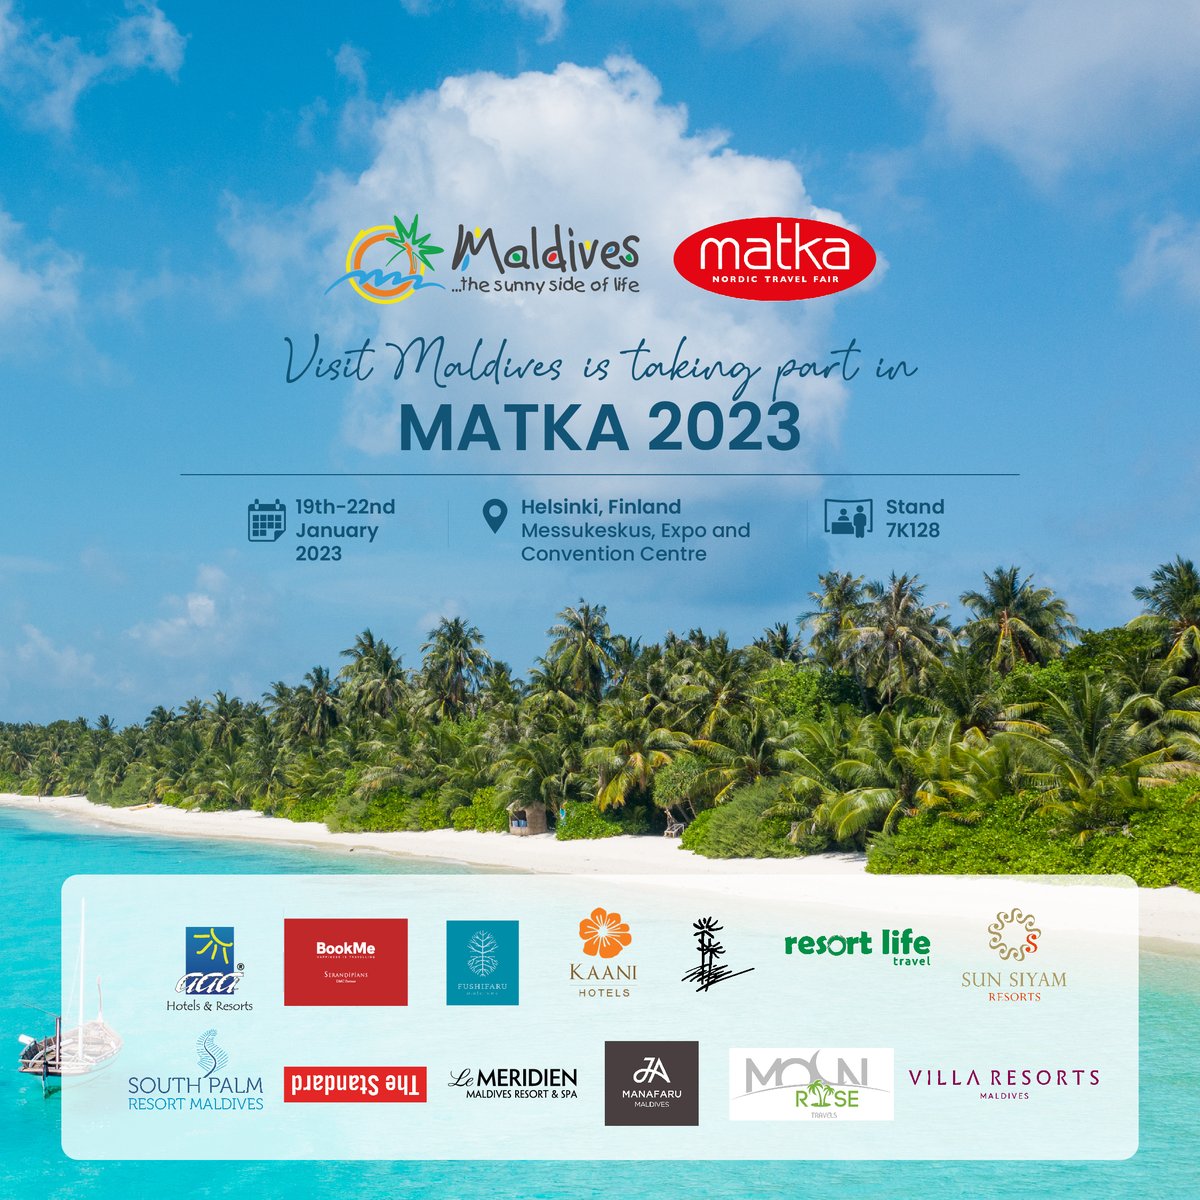 visitmaldives: Visit Maldives and our industry partners are promoting the Maldives at MATKA 2023, held in Messukeskus, Expo and Convention Centre, Helsinki. Come see what makes the Sunny Side of Life so special!

#WorldsLeadingDestination2022 #VisitMaldi… https://t.co/WtIdoVzSqo